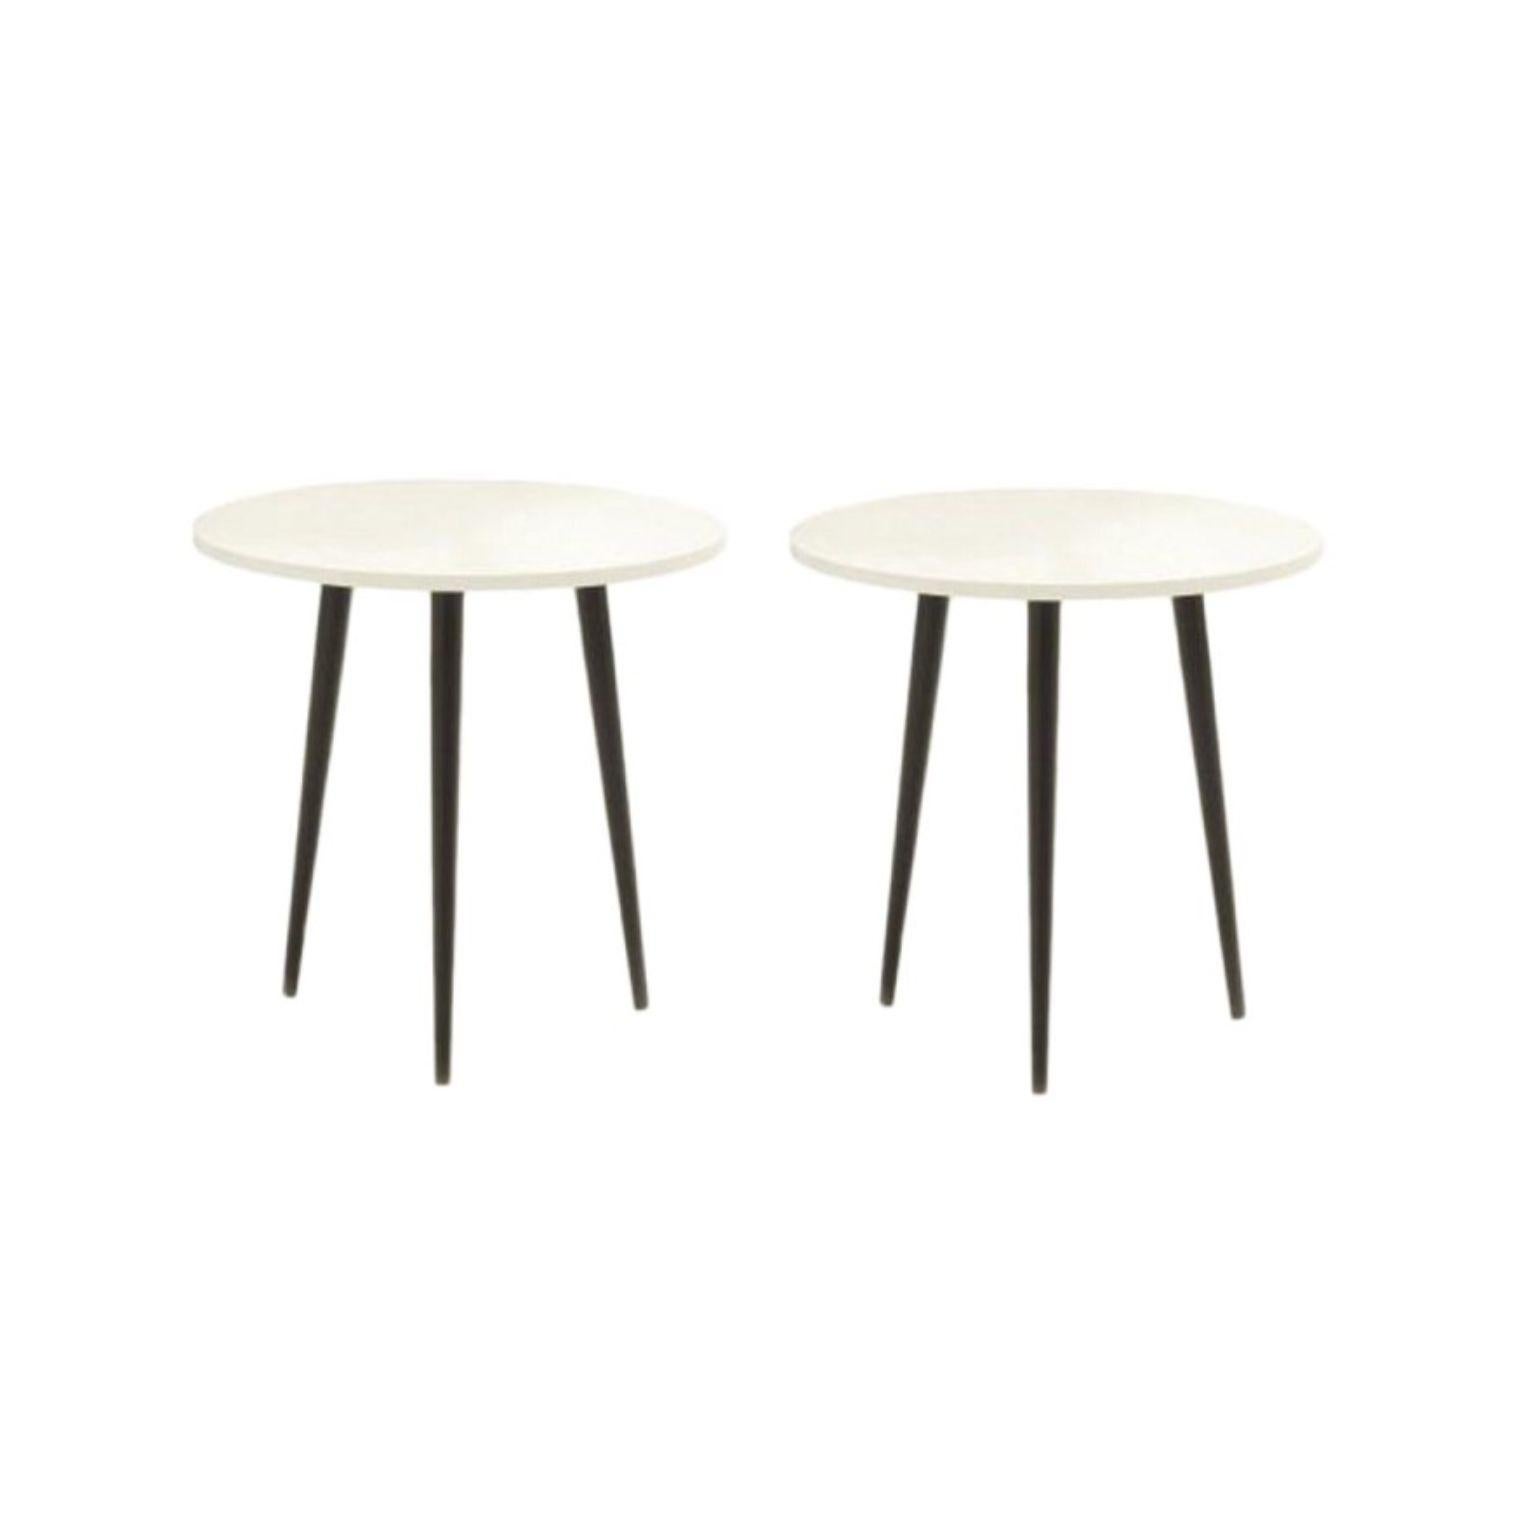 Set of 2 small round Soho side tables by Coedition Studio
Materials: round pedestal table, black or white or burgundy lacquered top on MDF. Black lacquered conical metal base.
Dimensions: diameter 40 x 40 cm
Available in different sizes and